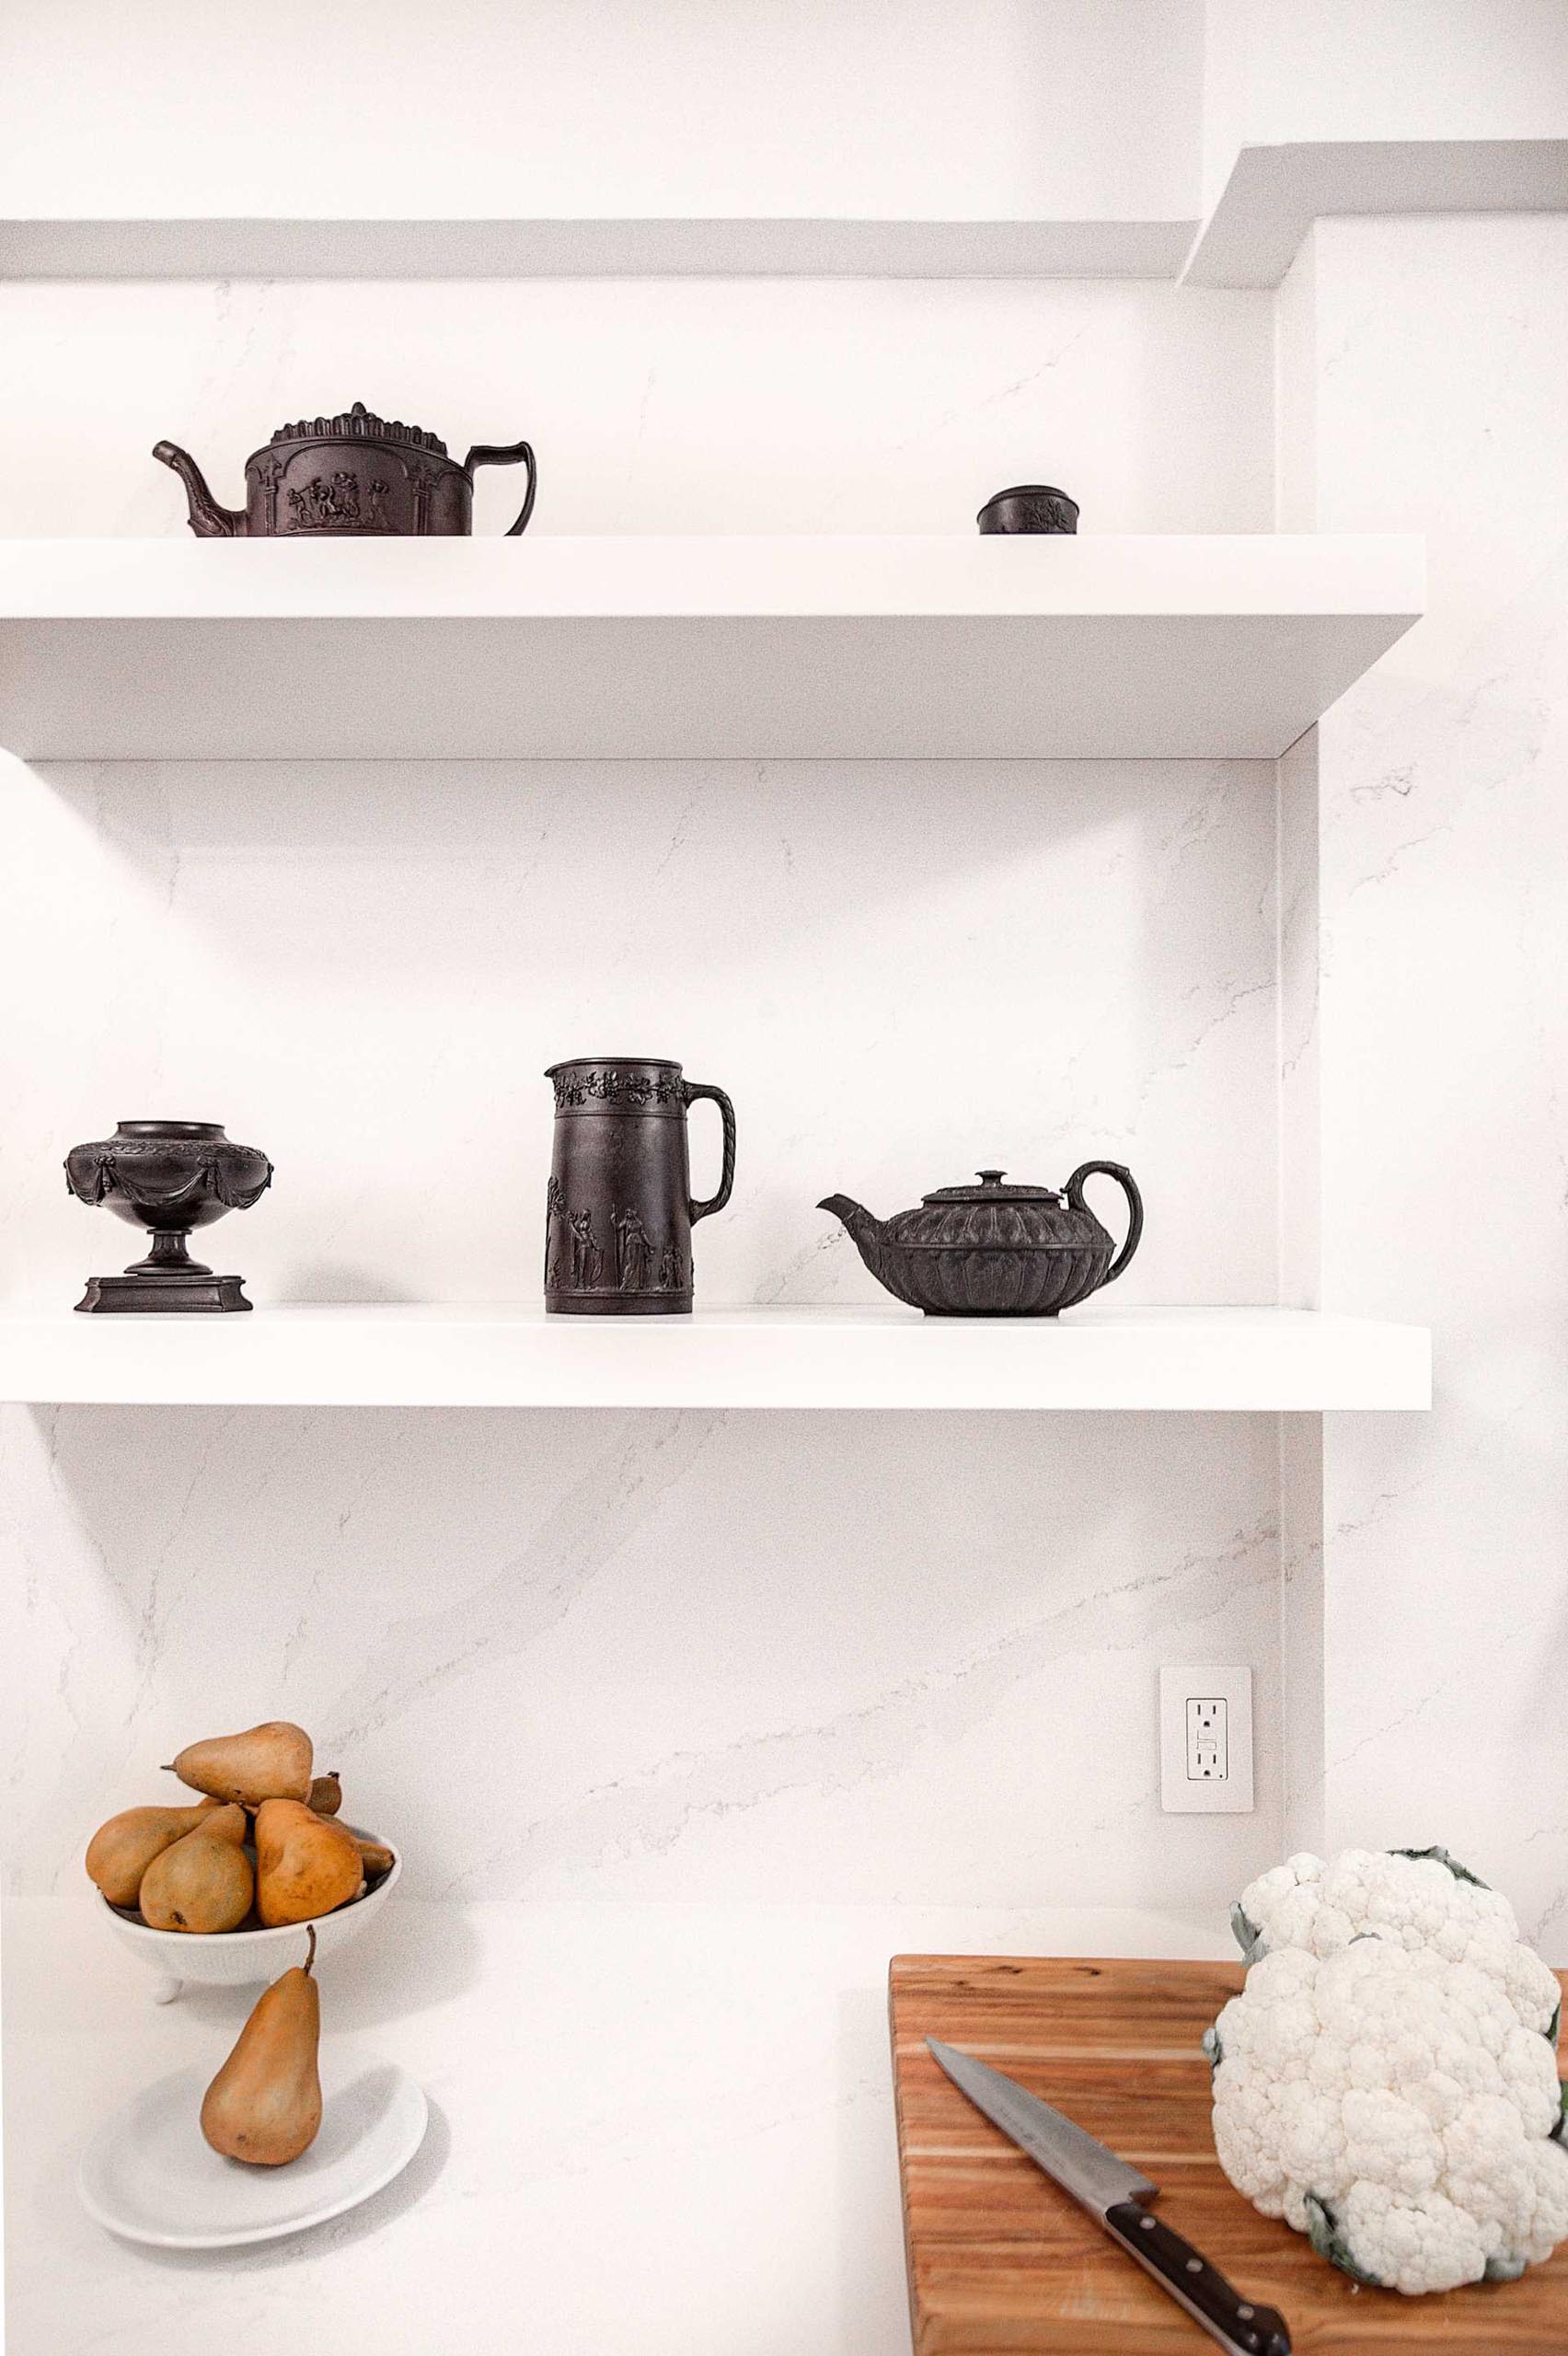 A remodeled kitchen with a pair of floating shelves that almost blend into the wall.